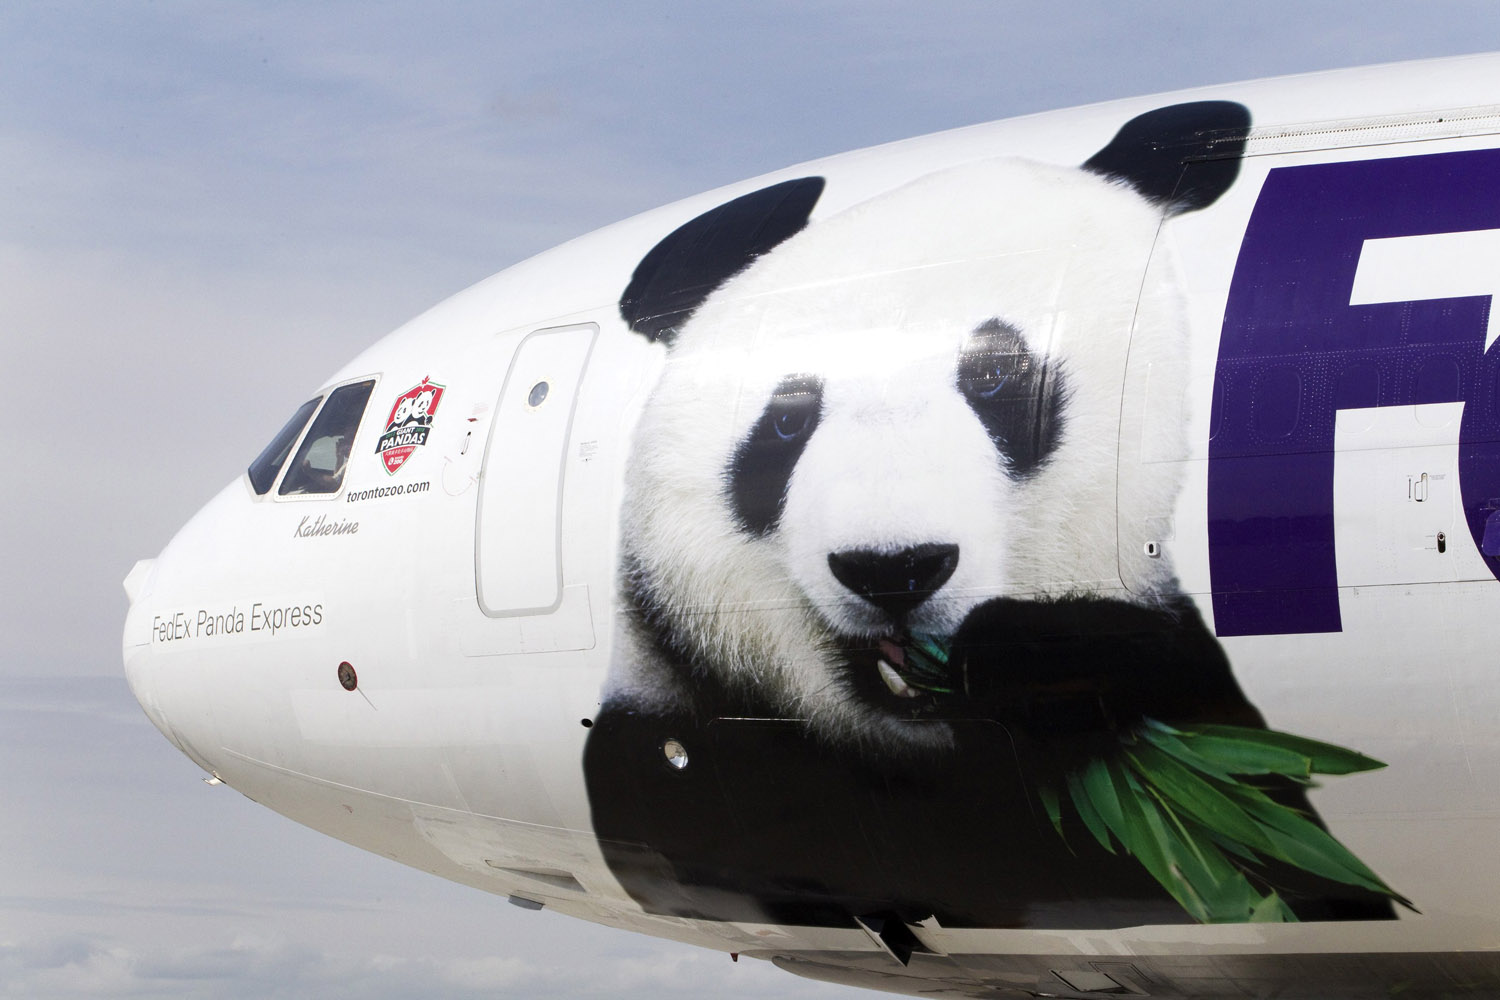 A Federal Express aircraft carrying two panda bears arrives at Pearson International airport in Toronto